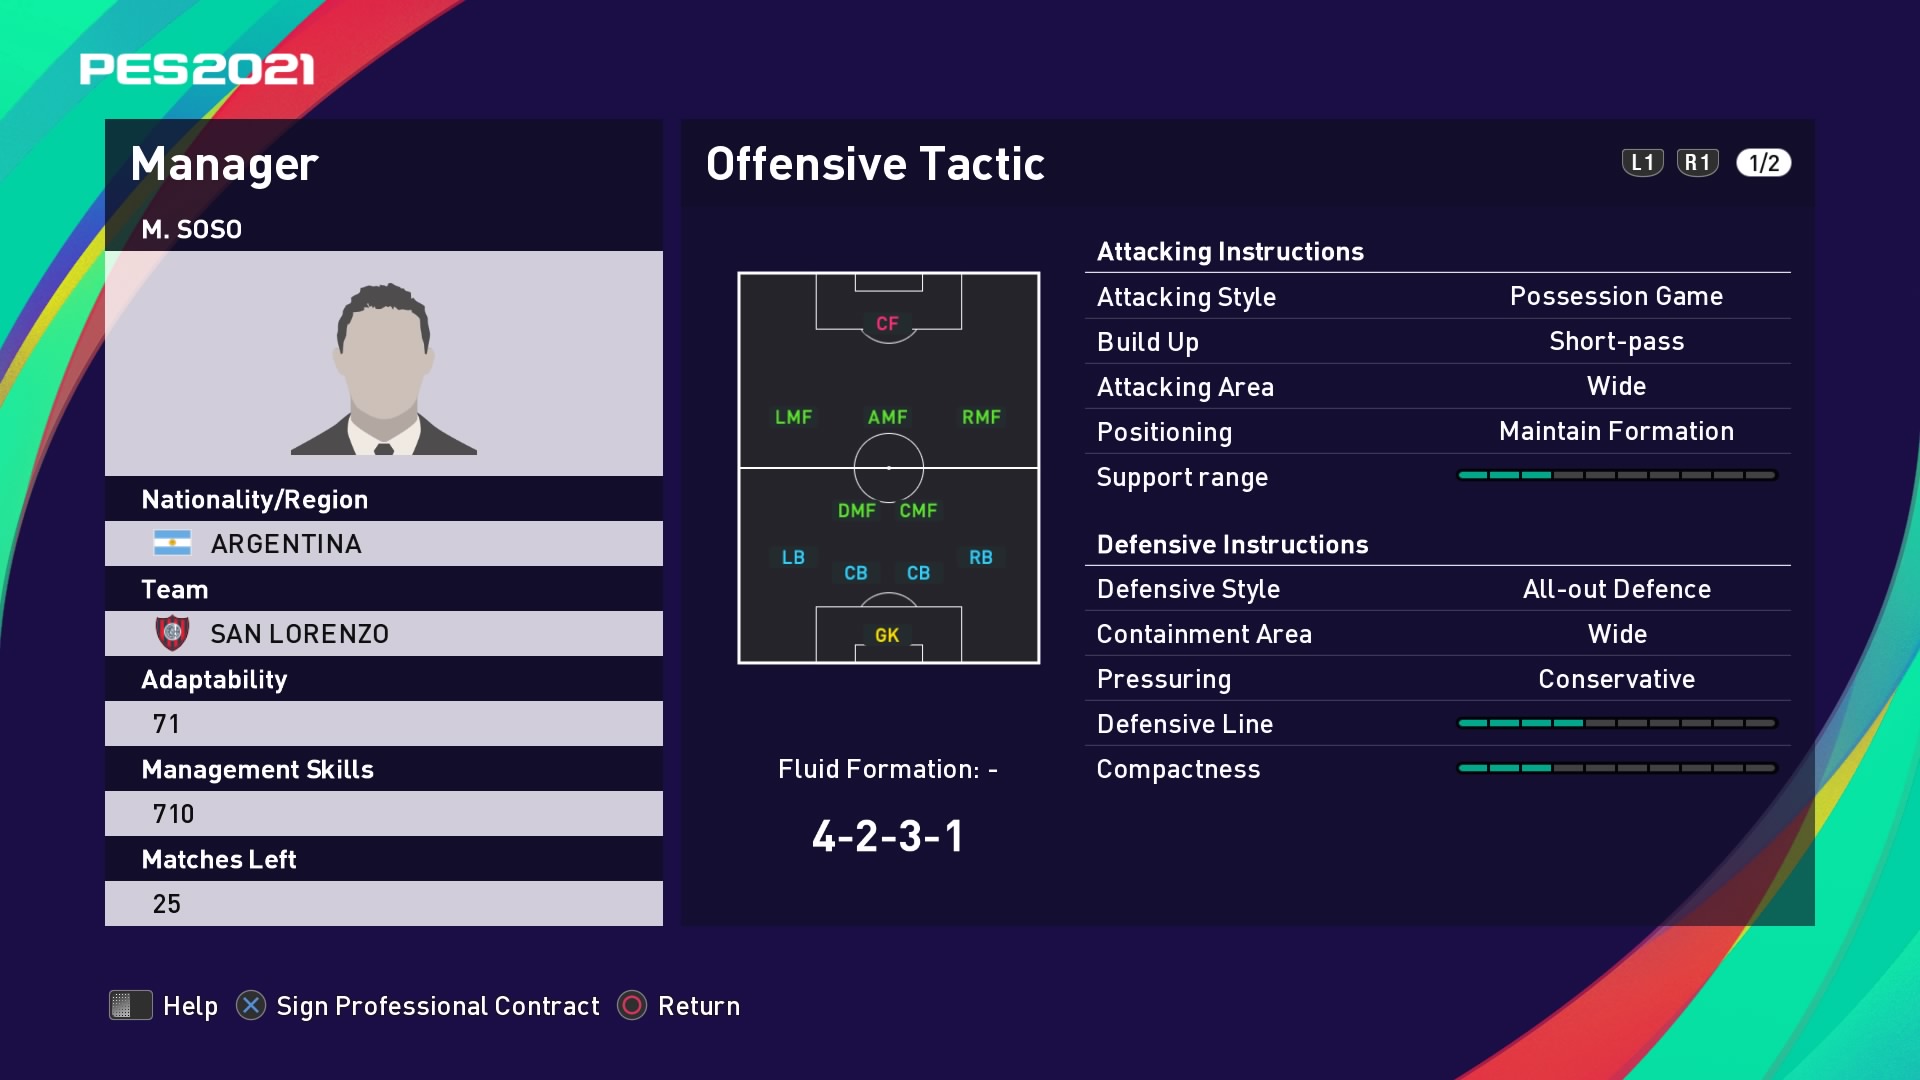 M. Soso (Mariano Soso) Offensive Tactic in PES 2021 myClub